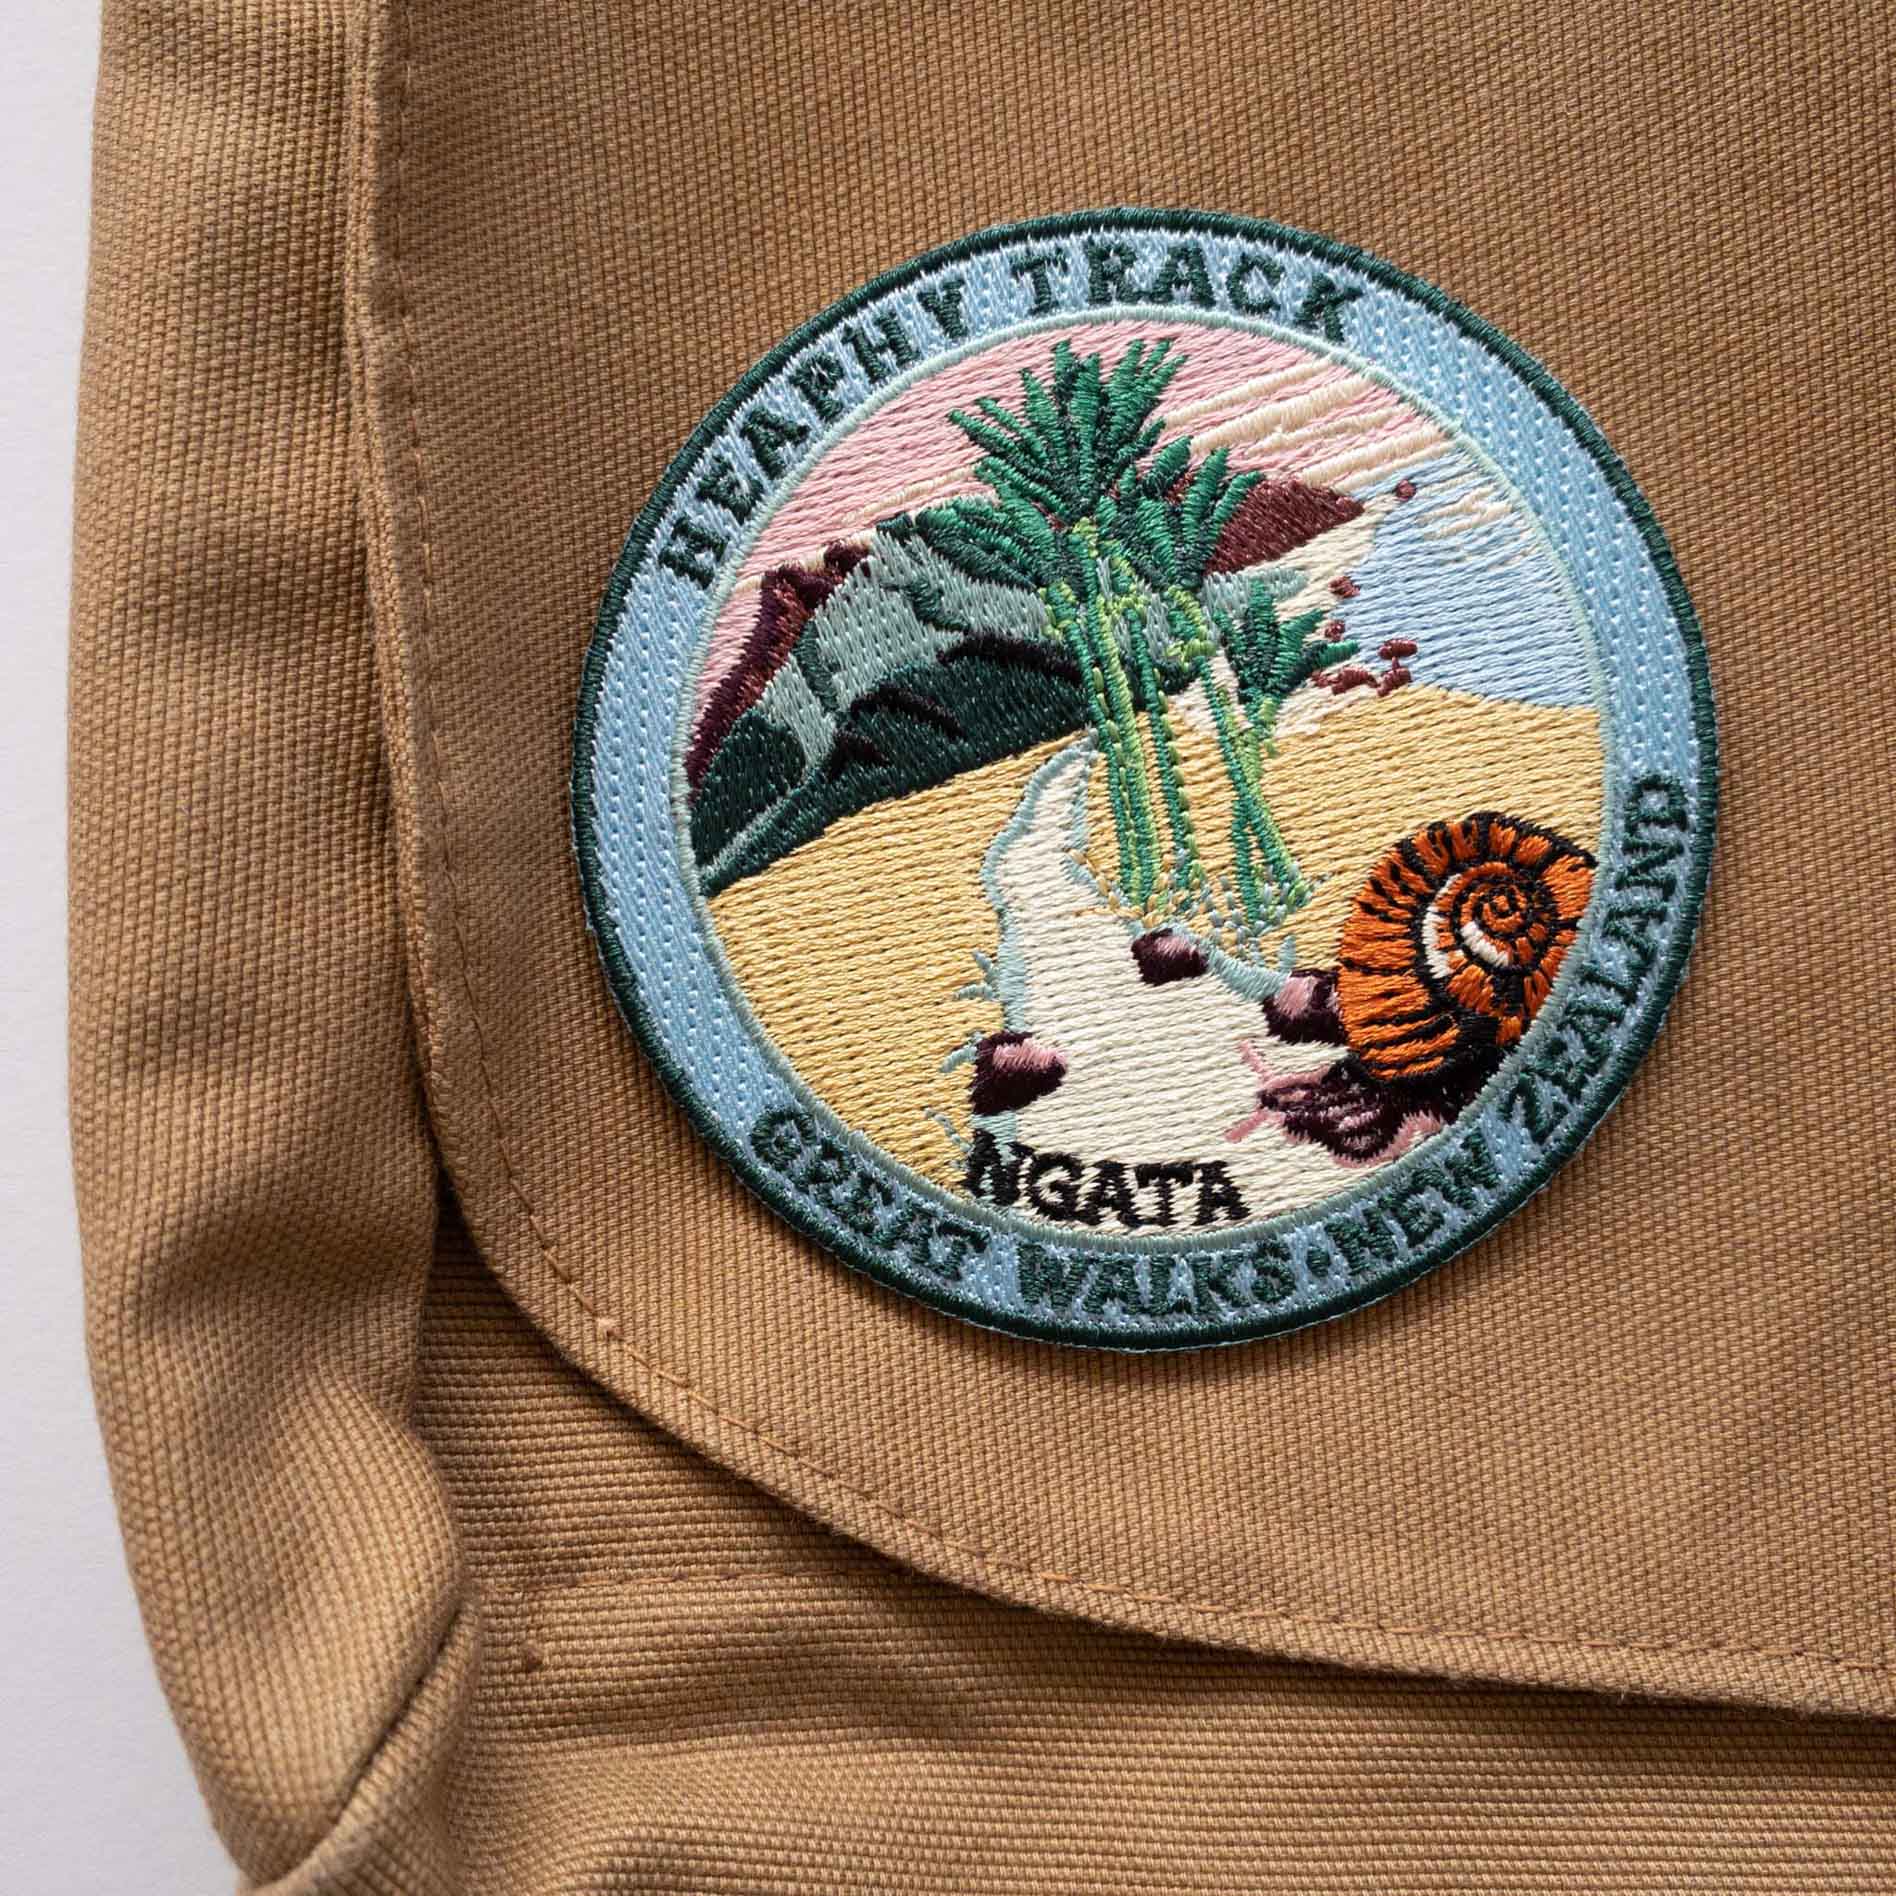 Round, embroidered Heaphy Track patch, with a snail, nikau palms, green hills and pink sky, on a brown canvas bag..